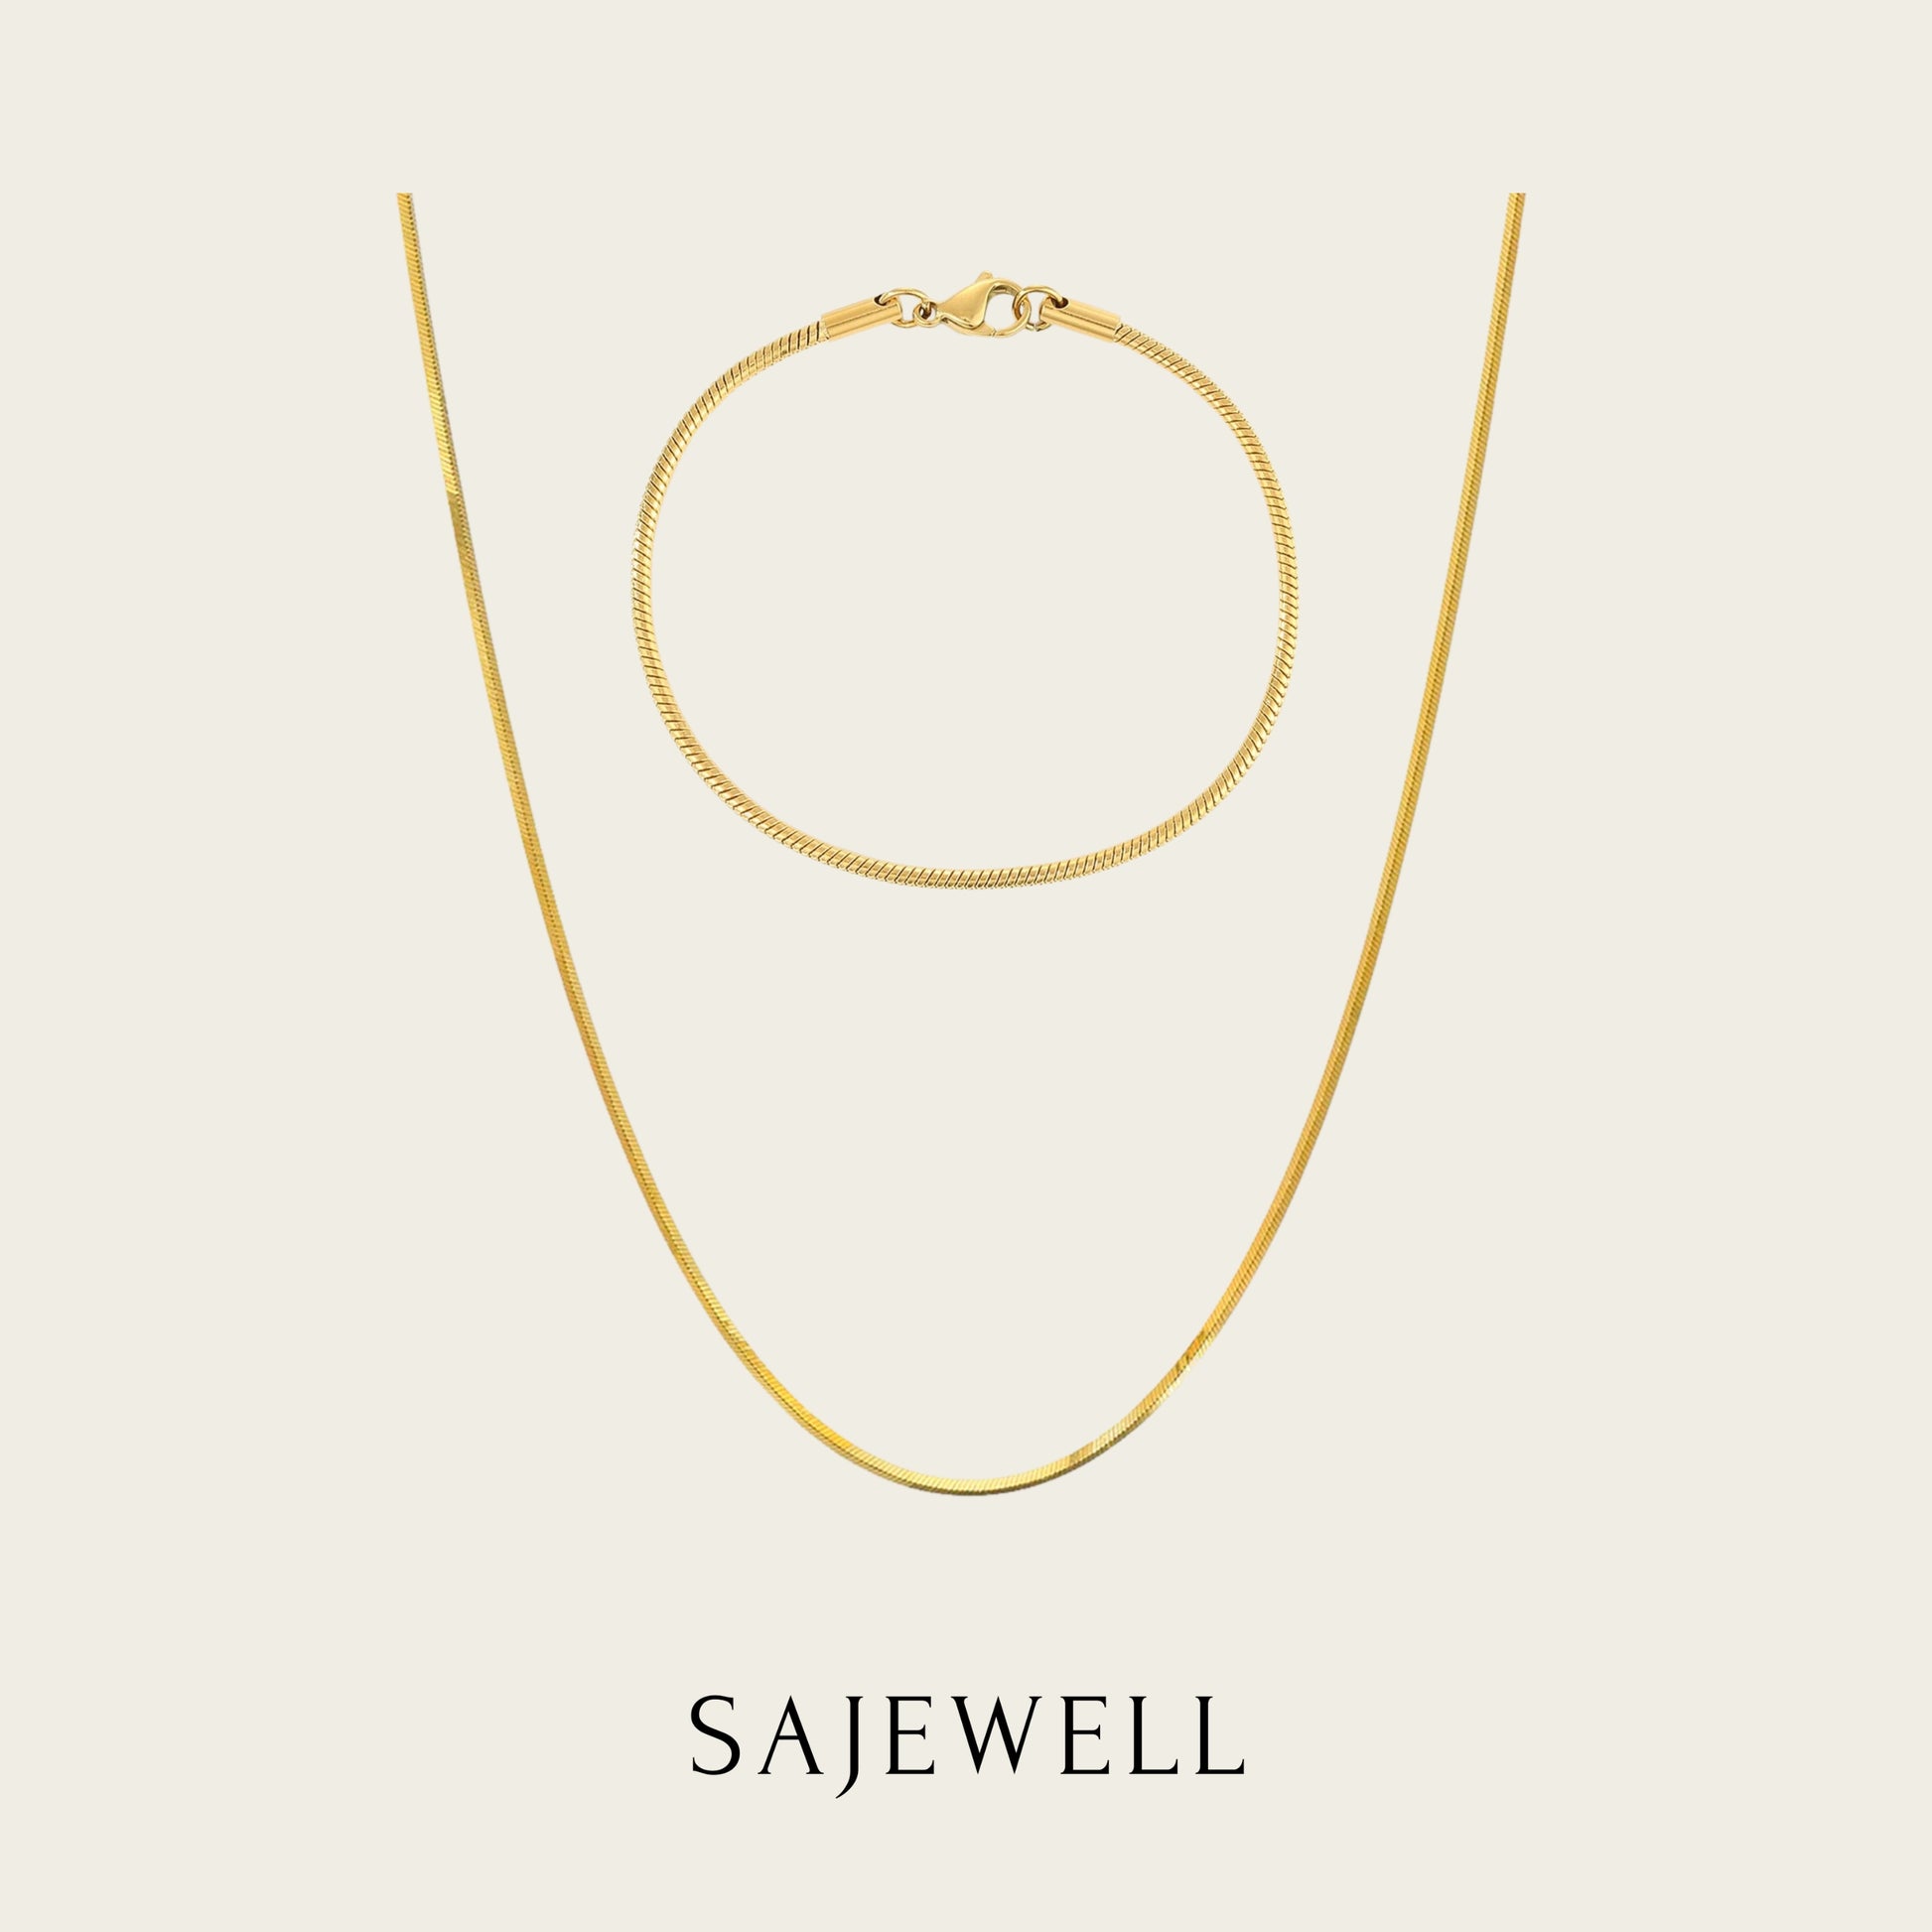 TT500016 Sajewell Titanium Steel 18K Gold Plated Round Thin Snake Chain Jewelry Set (necklace and bracelet)